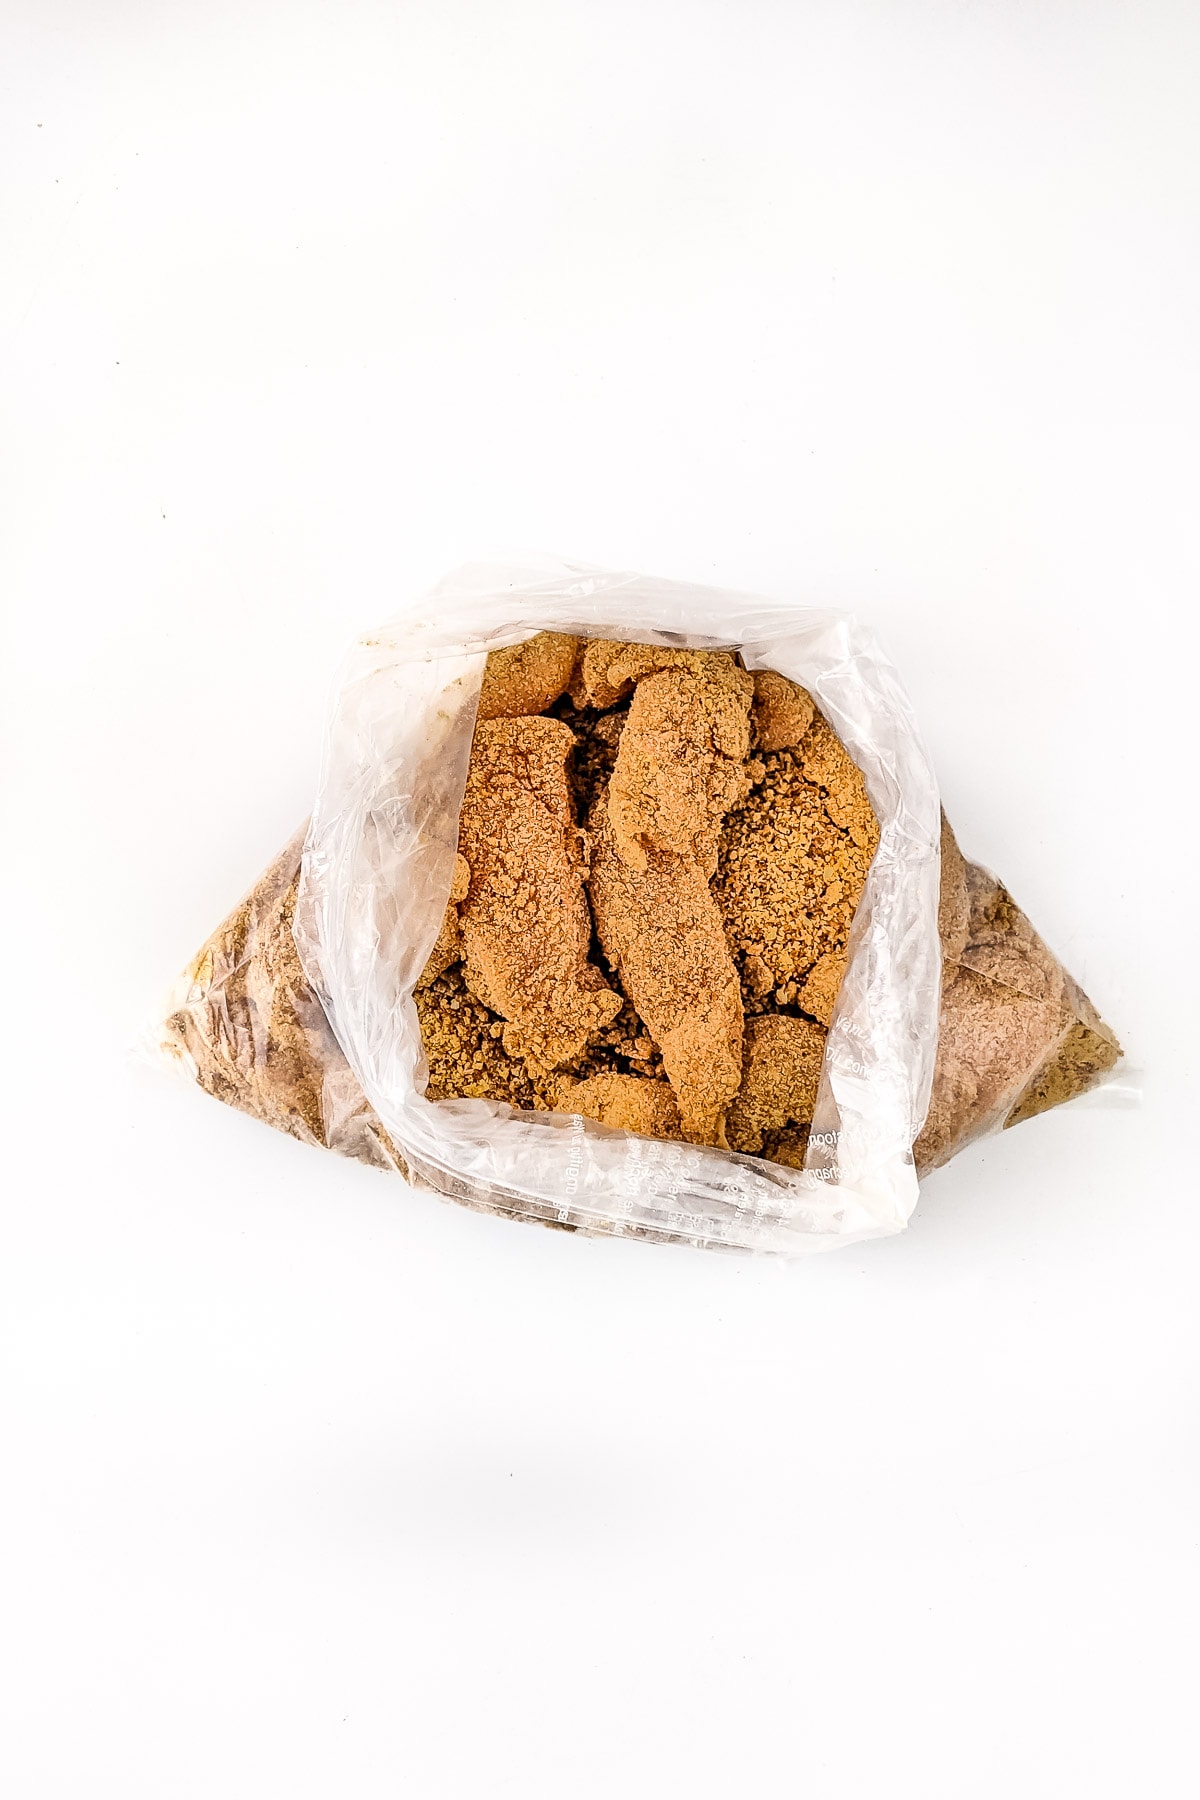 Plastic bag with Chicken strips coated with bread crumbs on all sides.